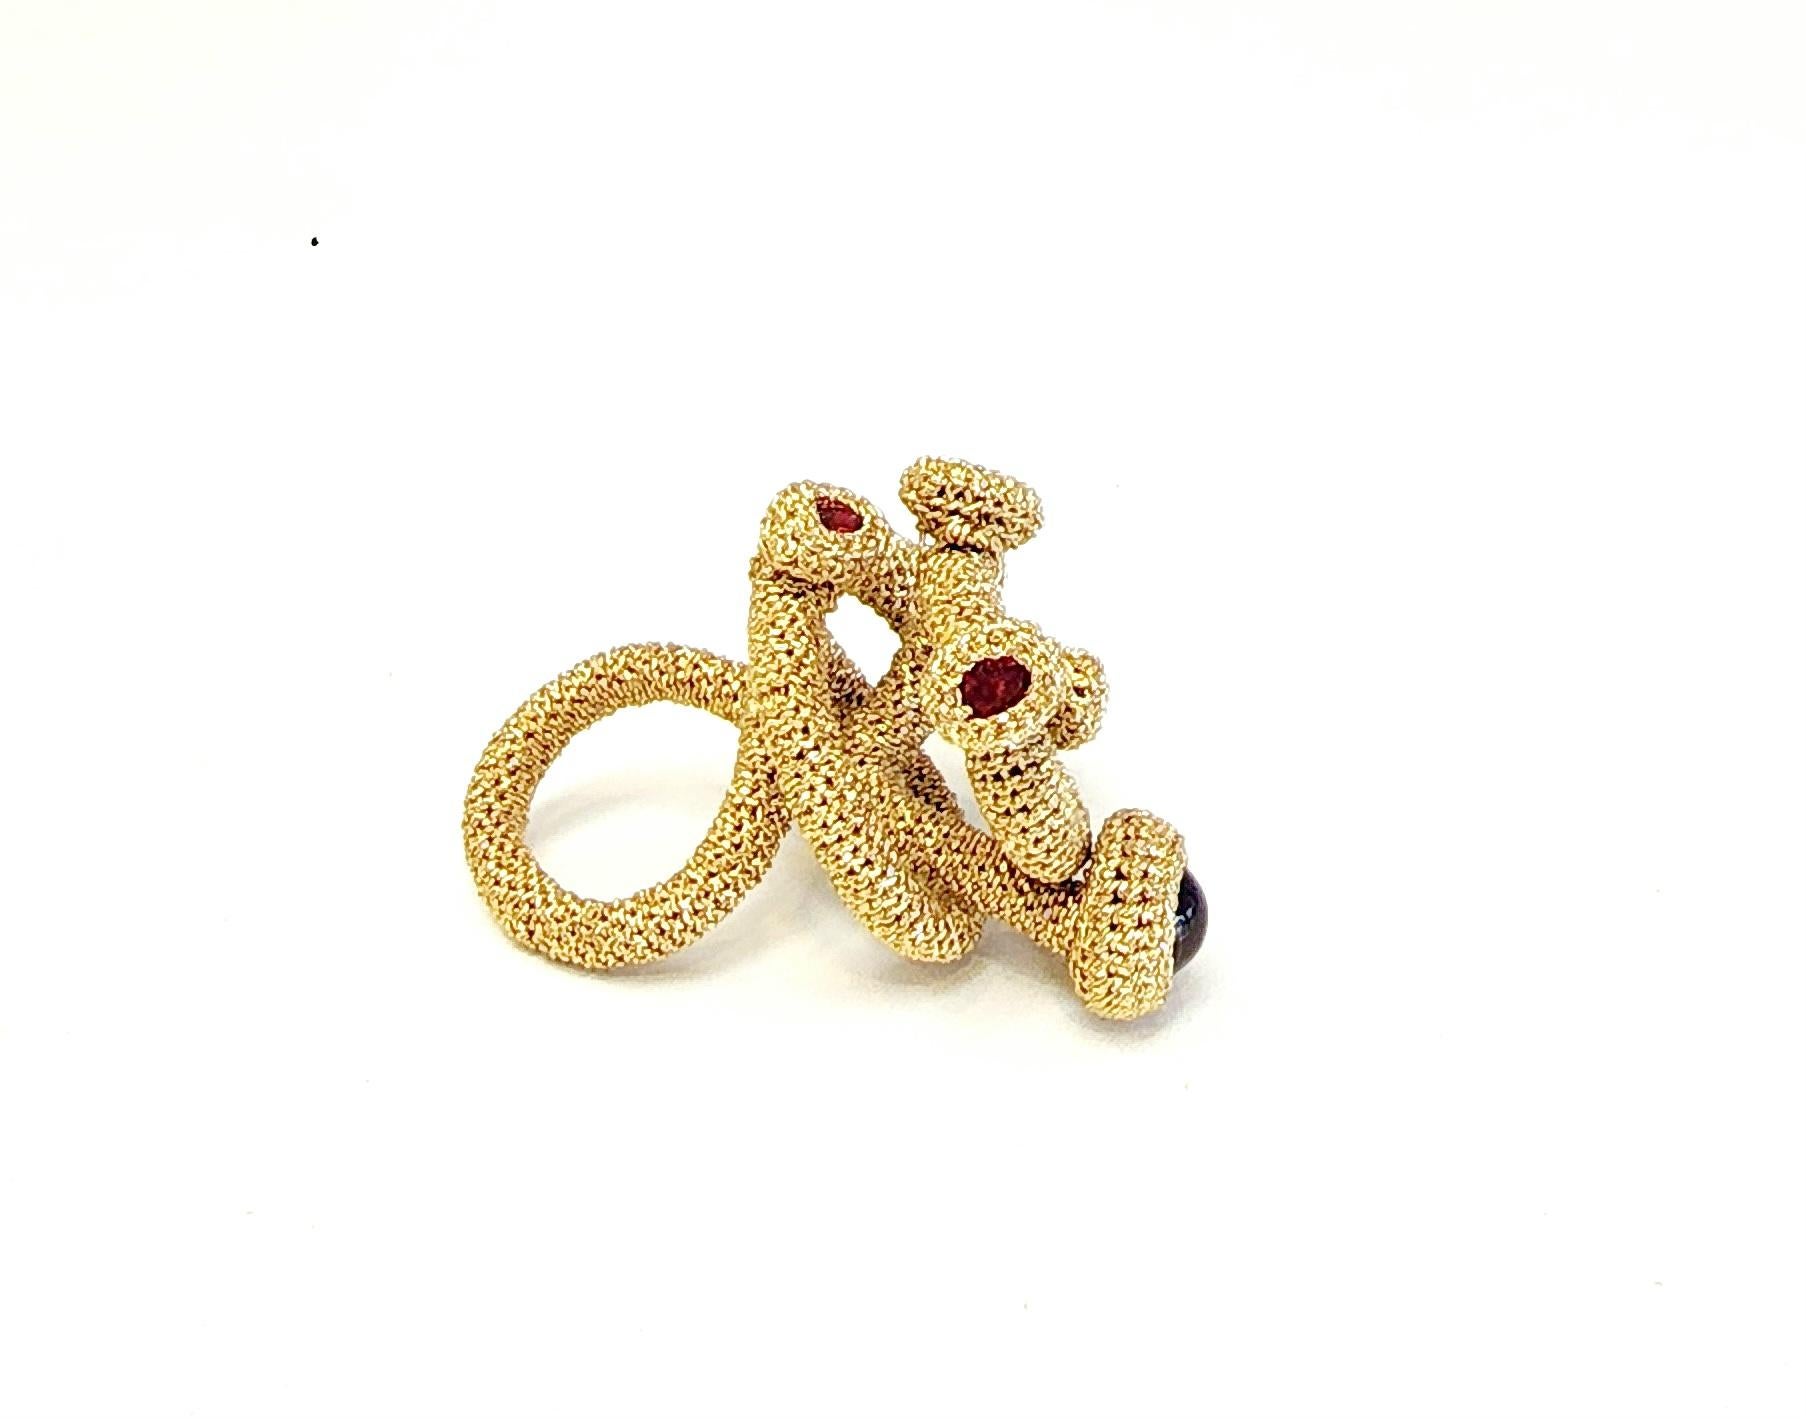 Mixed Cut Dark Golden Thread Crochet Ring Red Crystals For Sale